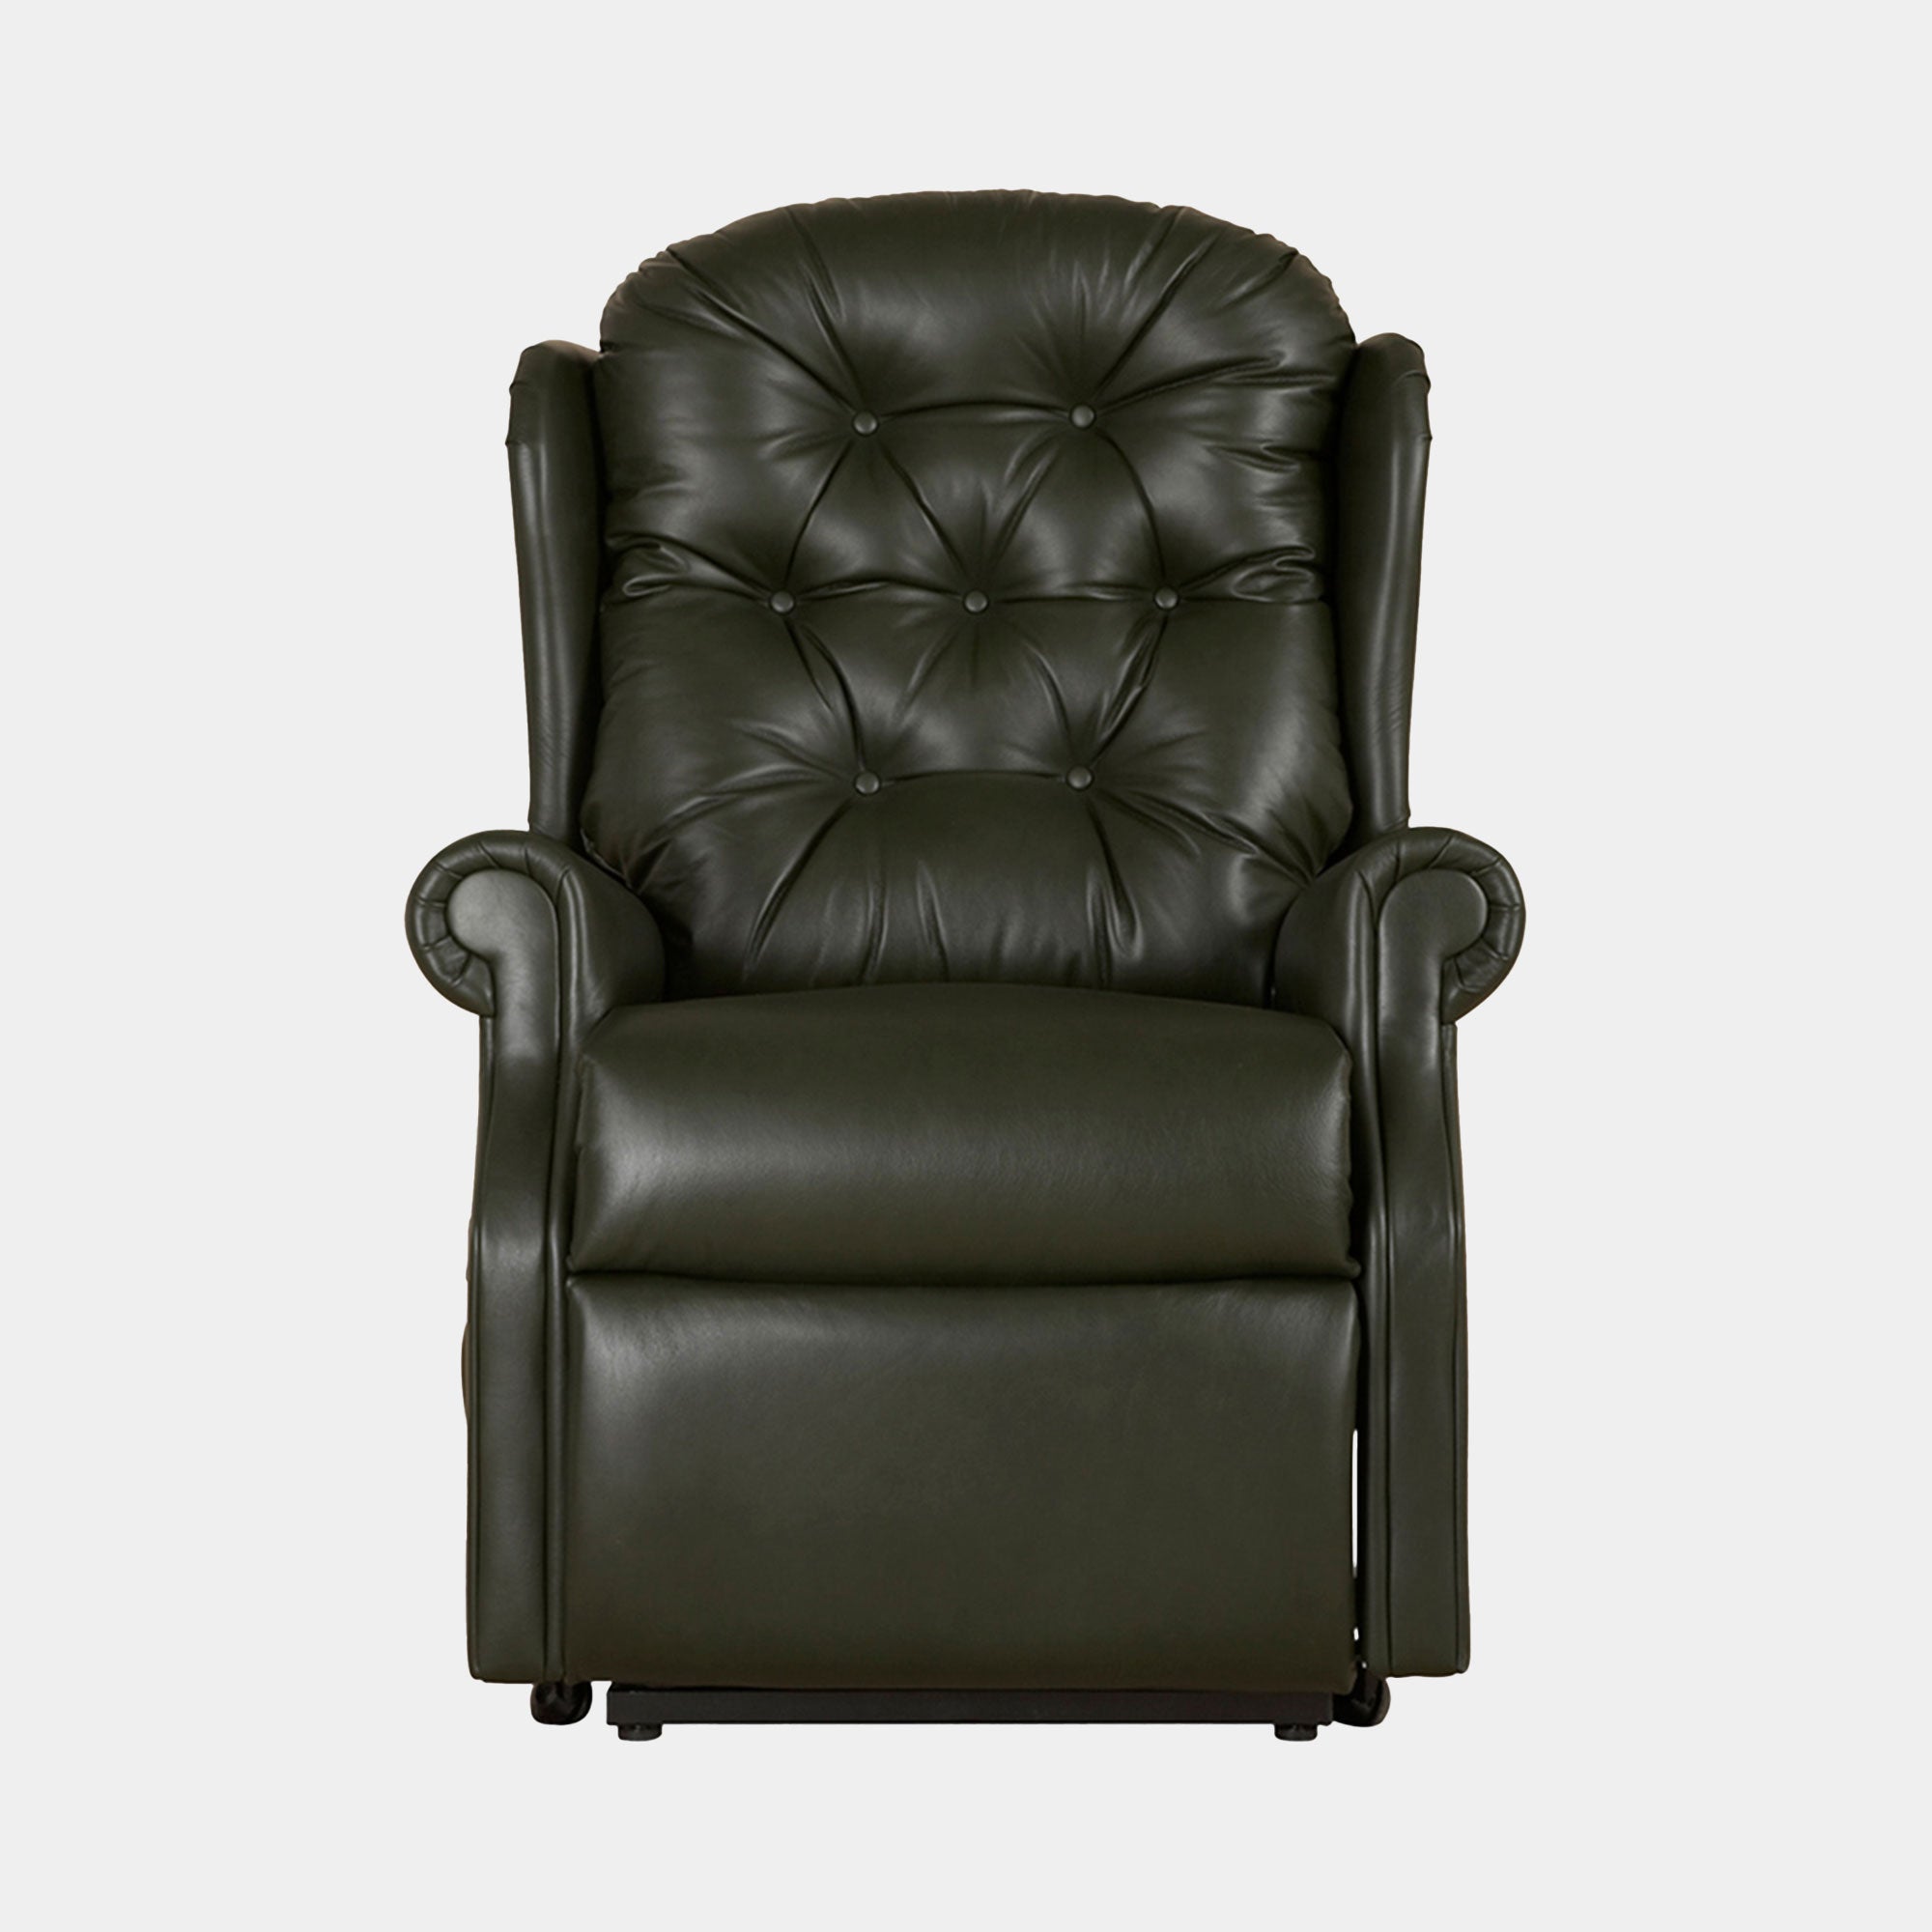 New Burford - Petite Manual Recliner In Leather